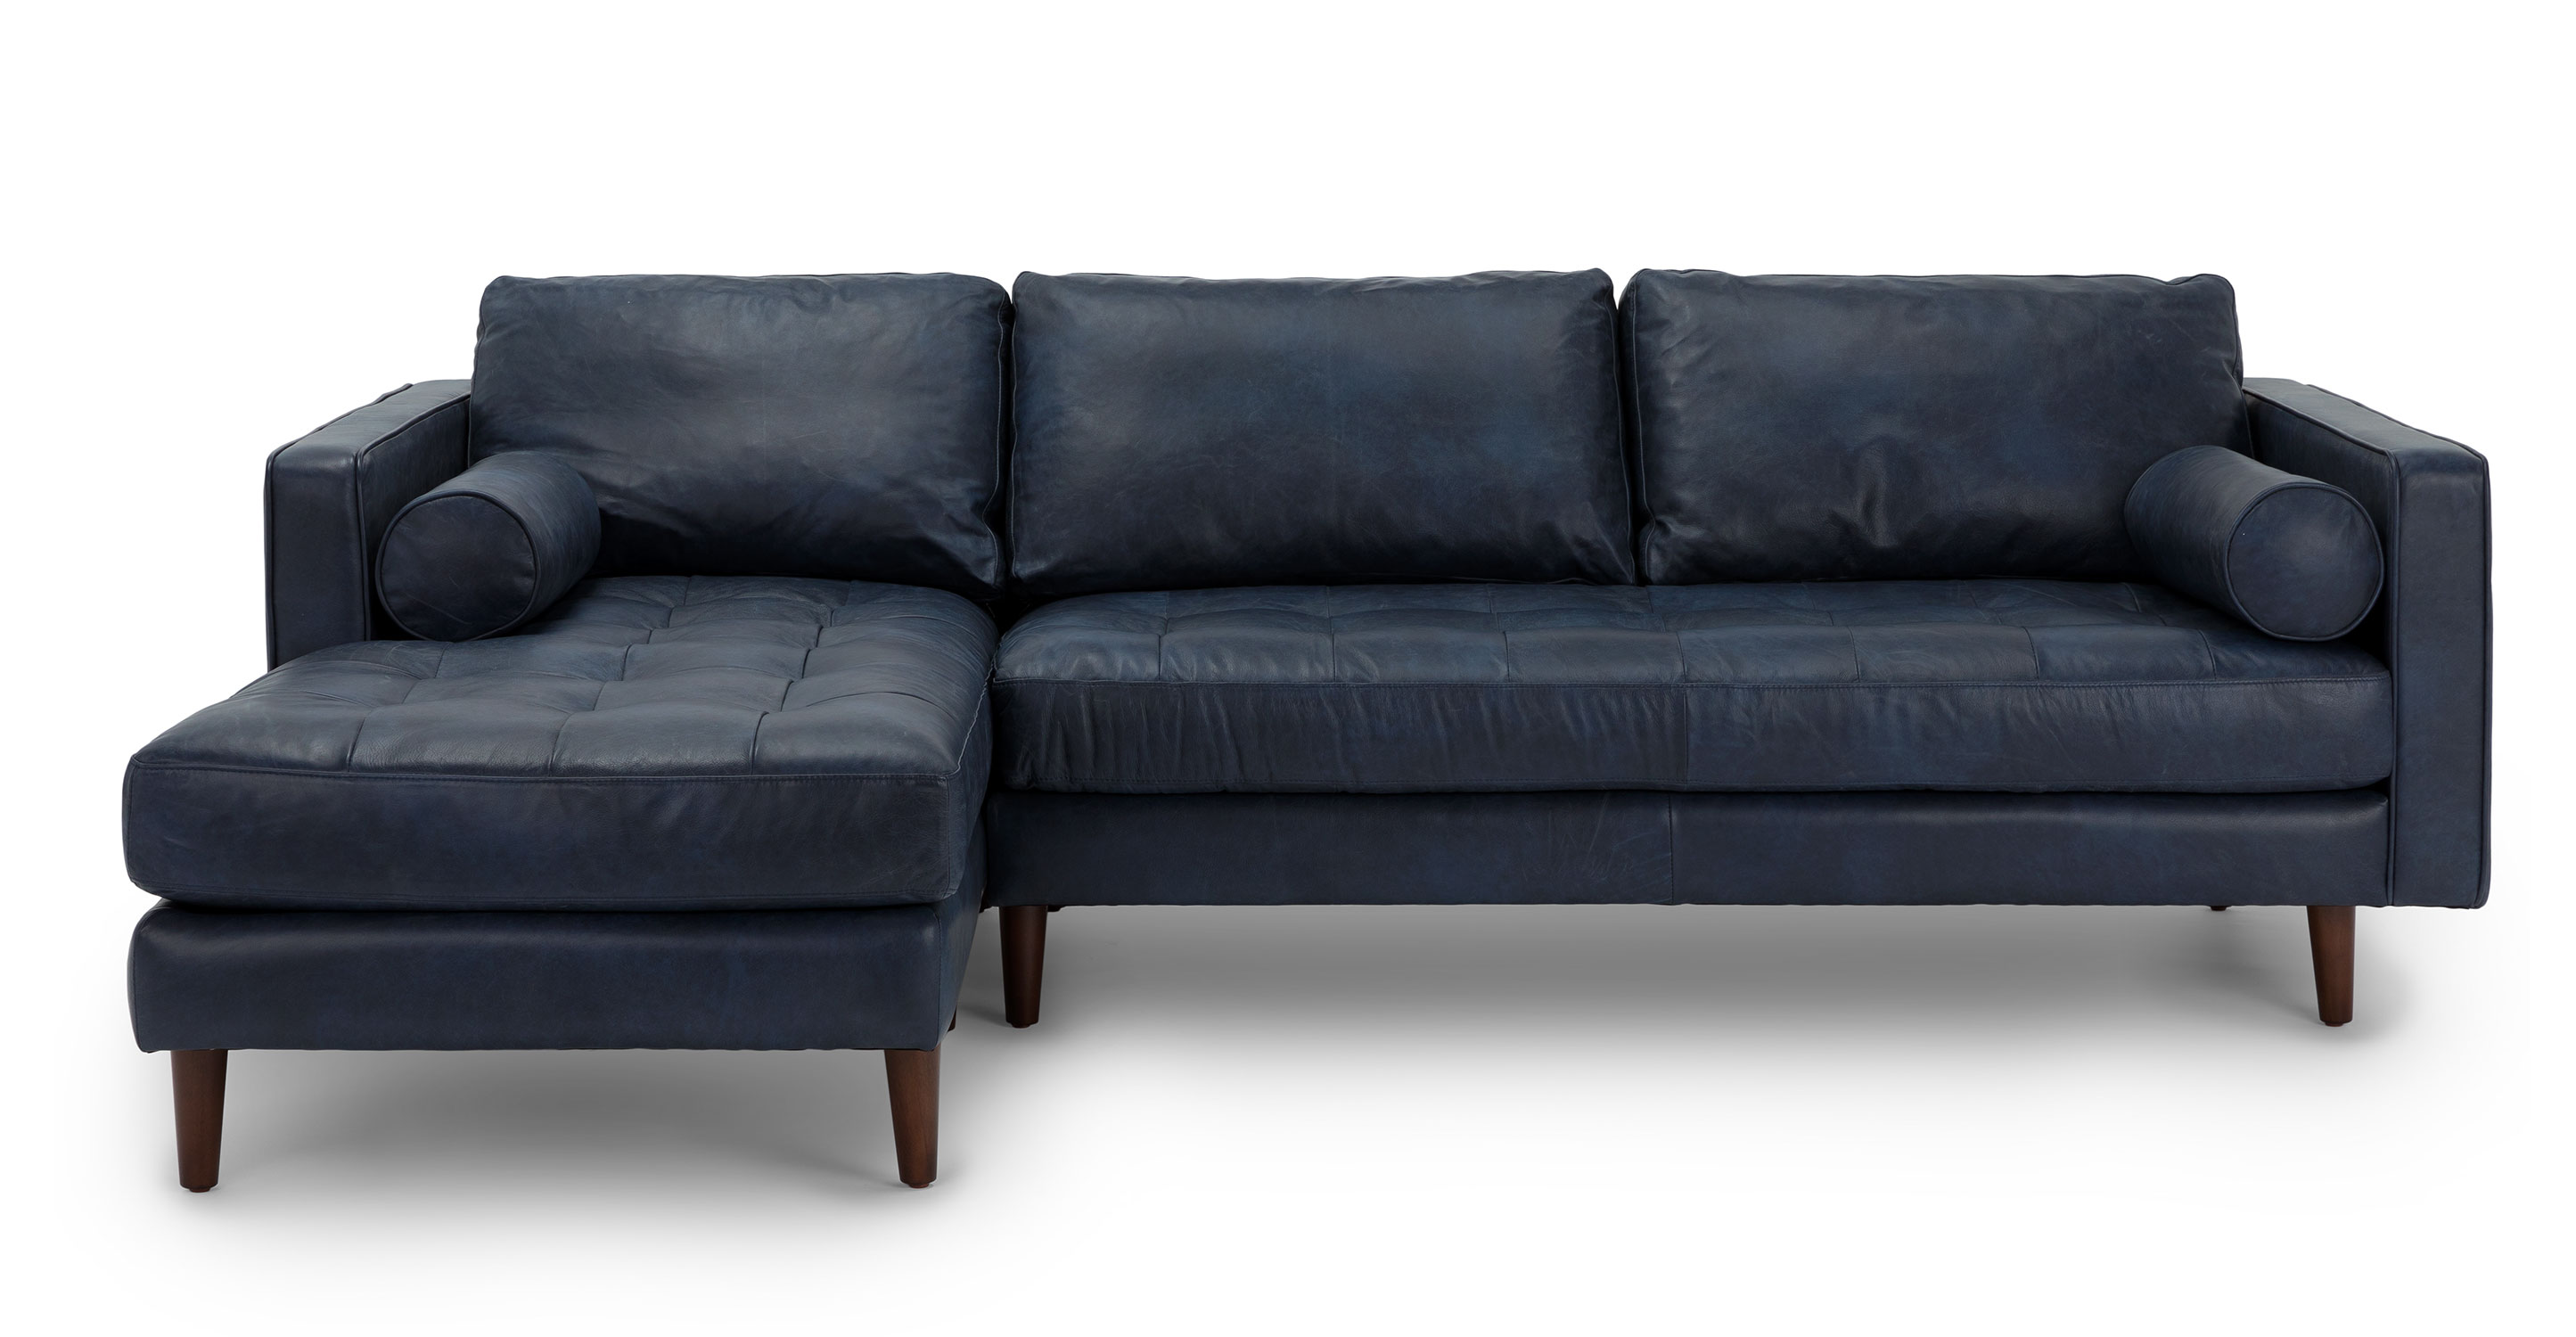 Blue Leather Sectional Sofas Couches, Blue Leather Sectional